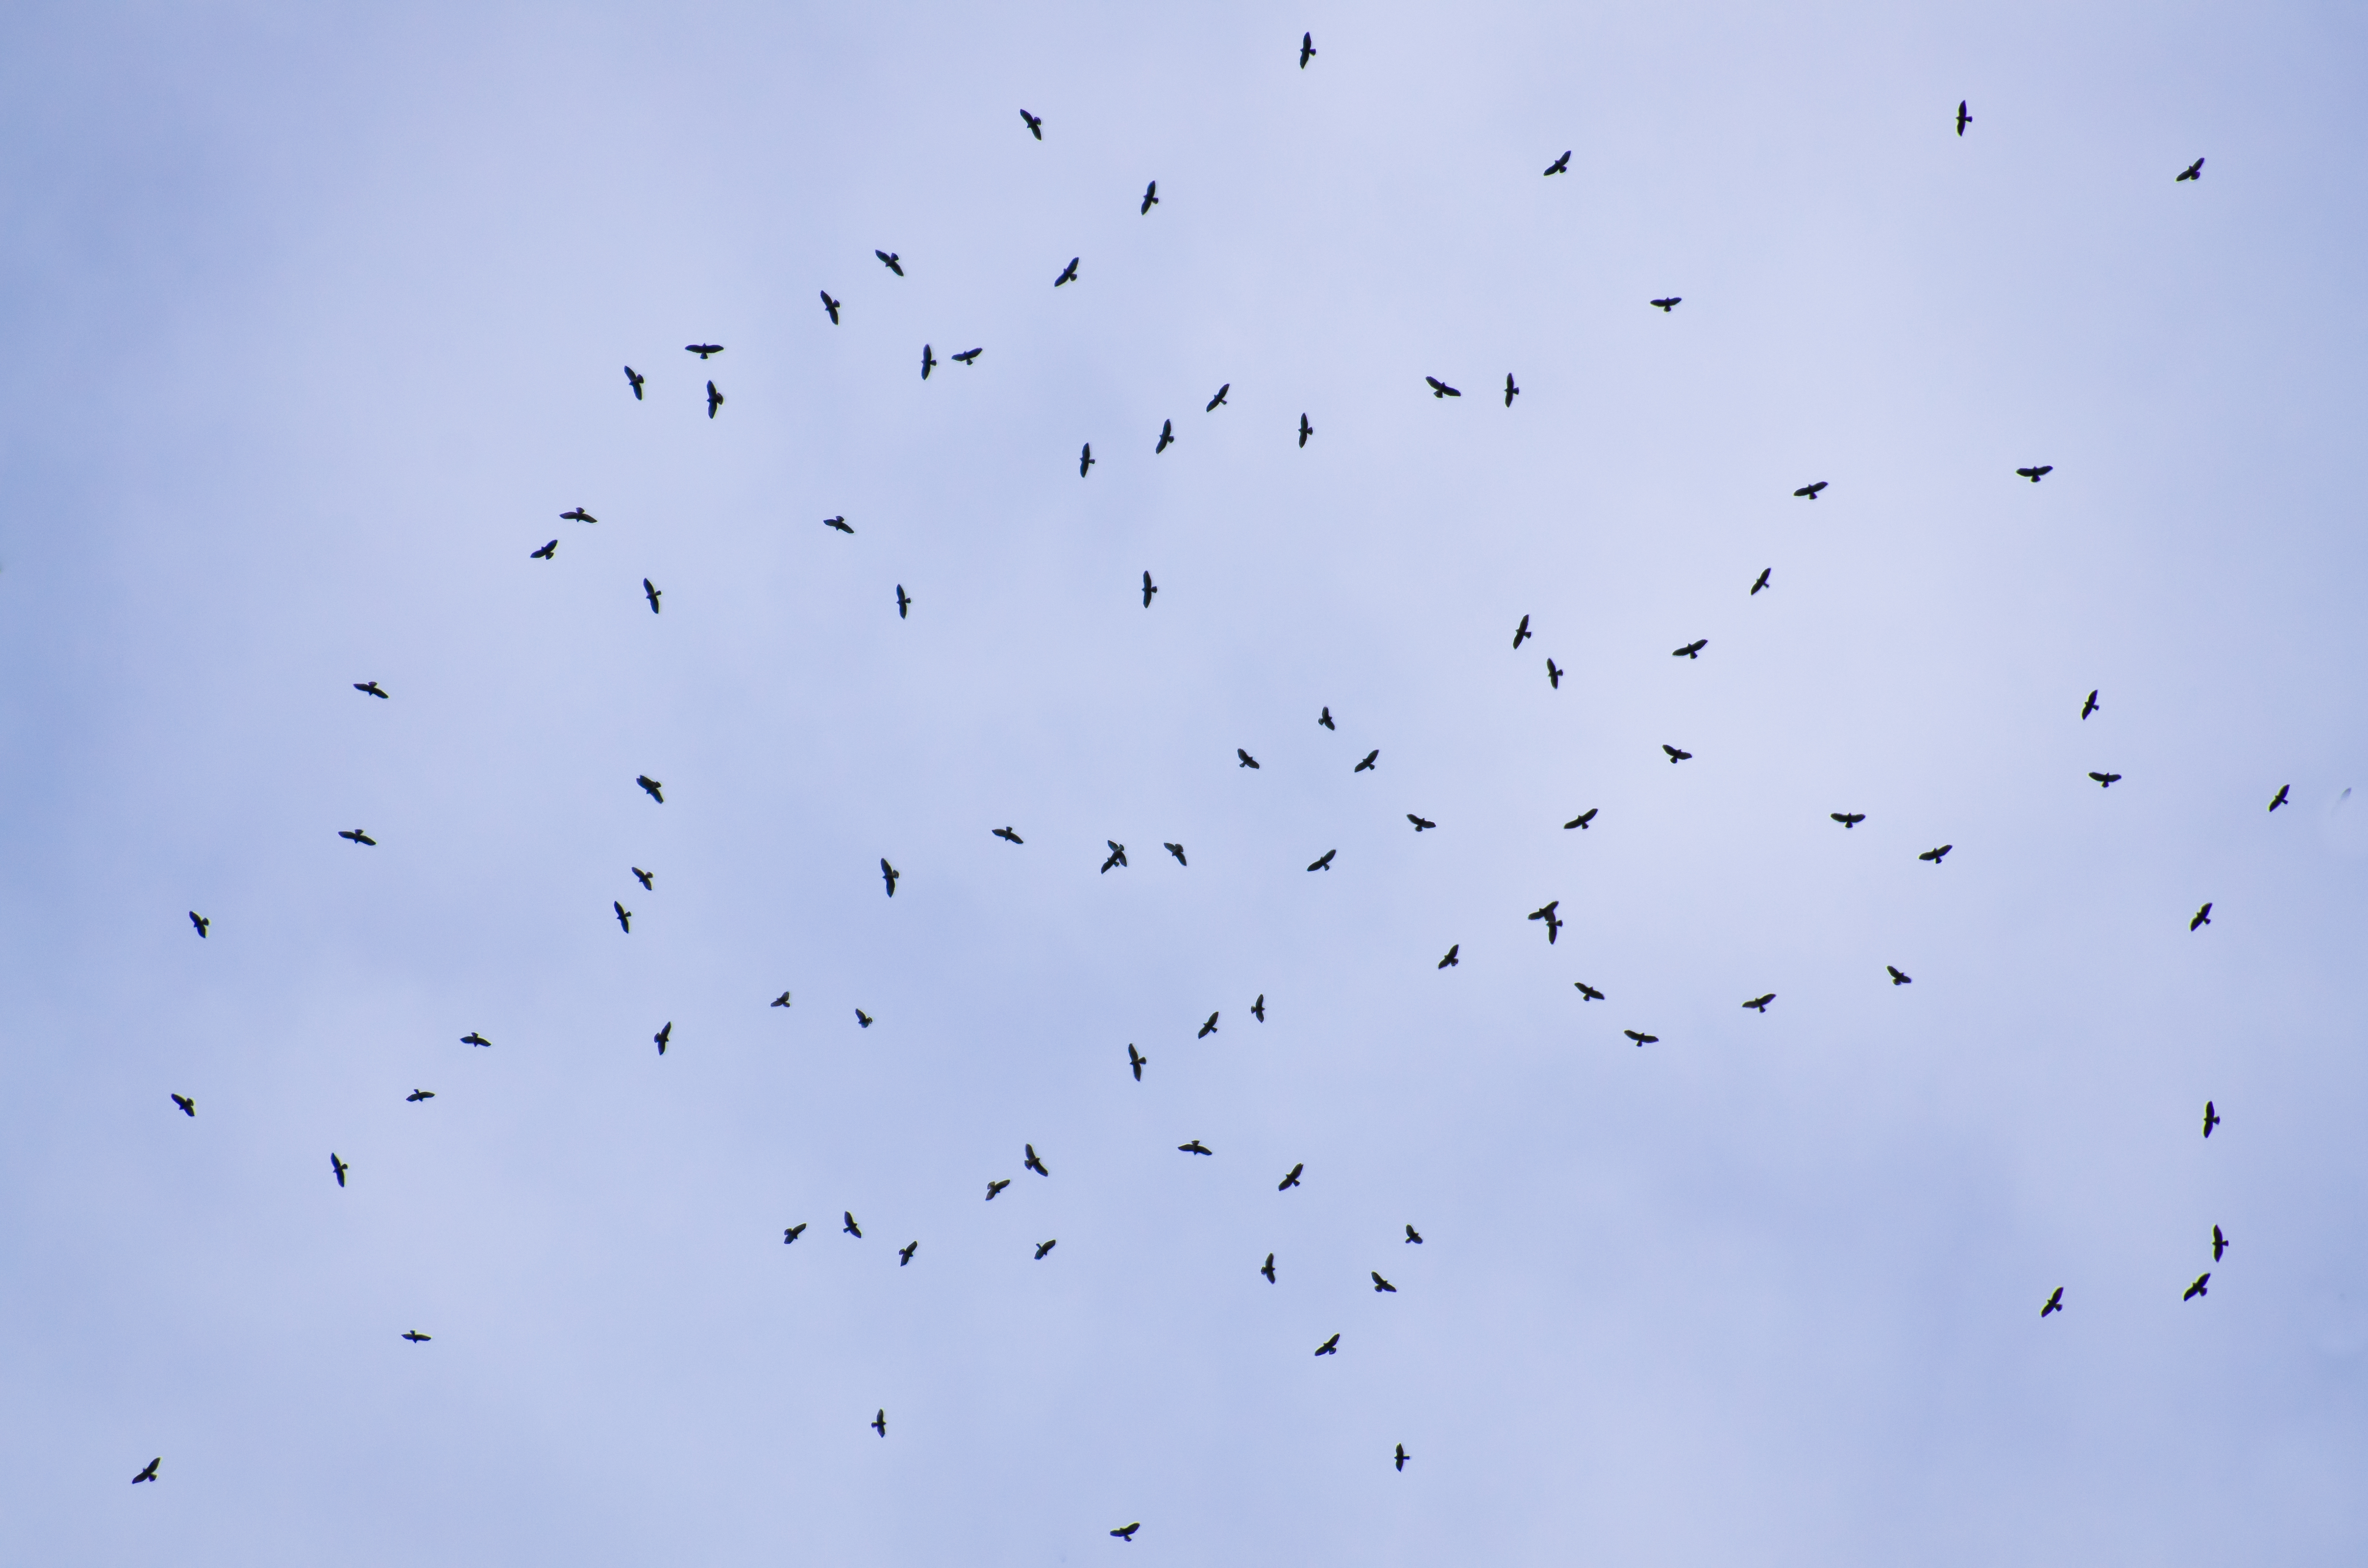 A kettle of migrating hawks against a slightly cloudy blue sky.